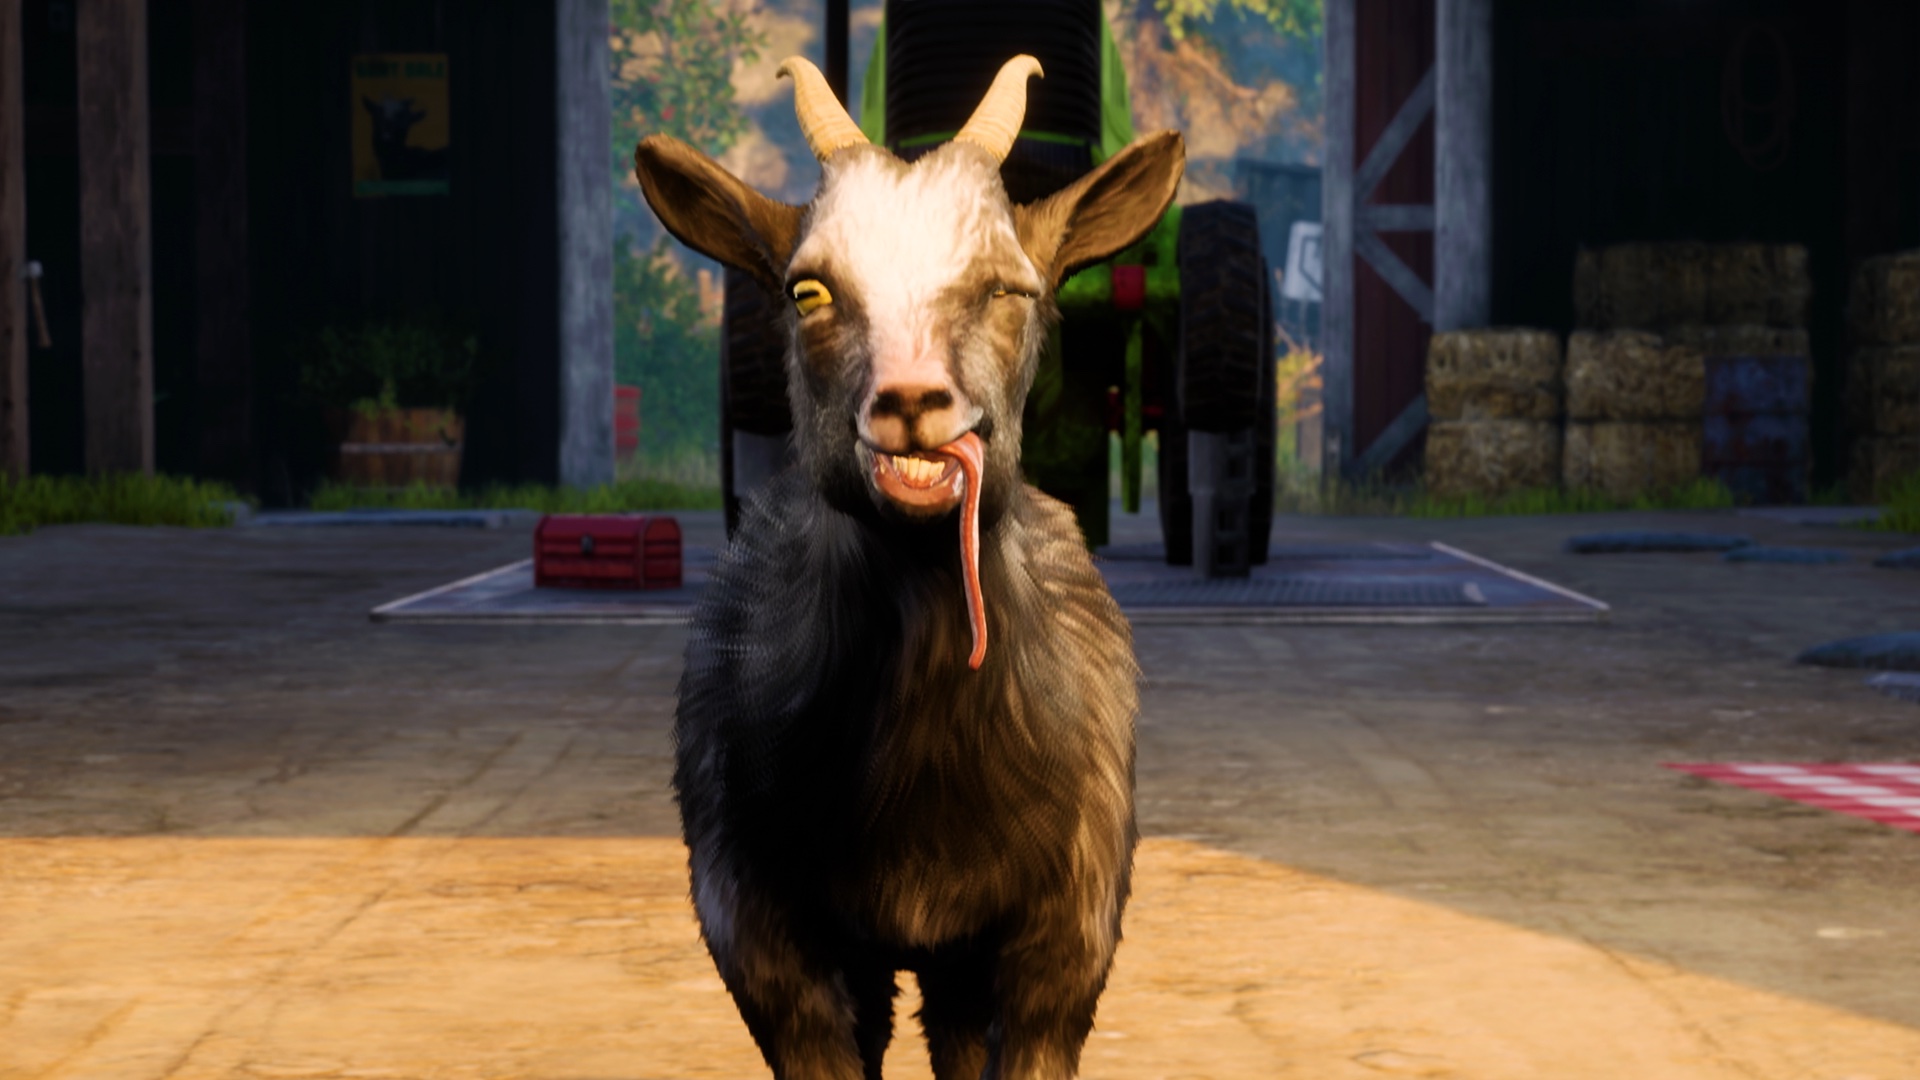 A goat from Goat Simulator 3 faces the camera, winking and with its tongue hanging out